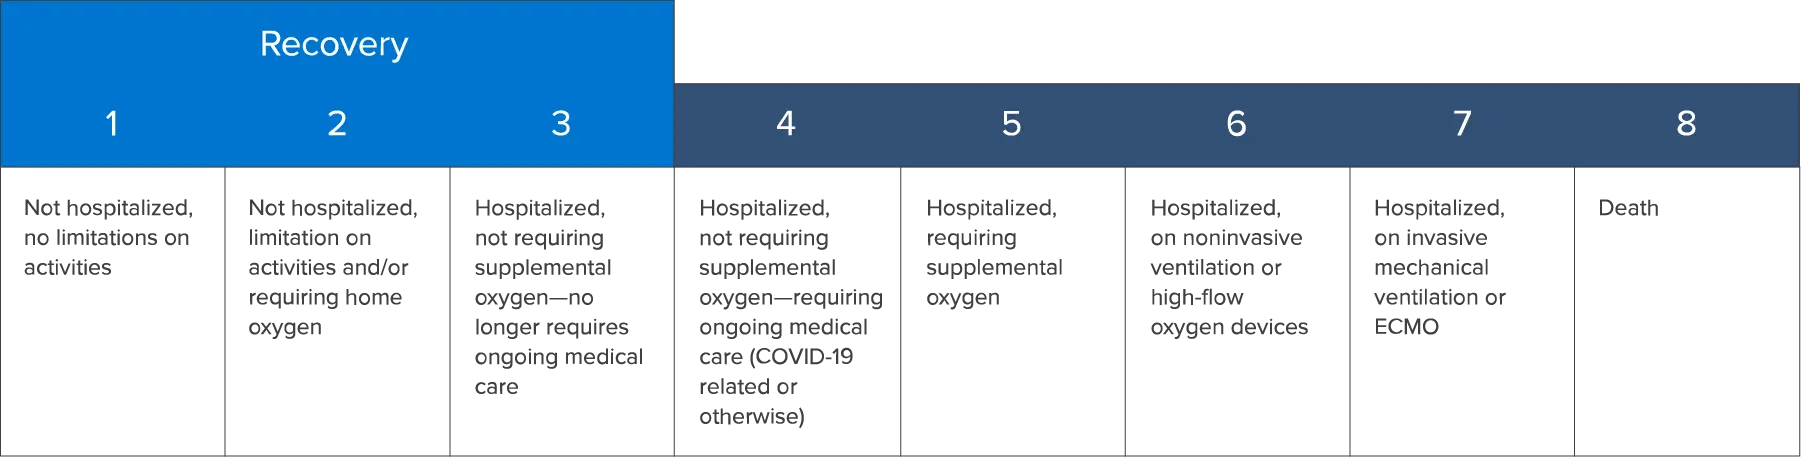 A graphic showing the patient's clinical status assessed on an 8-point ordinal scale